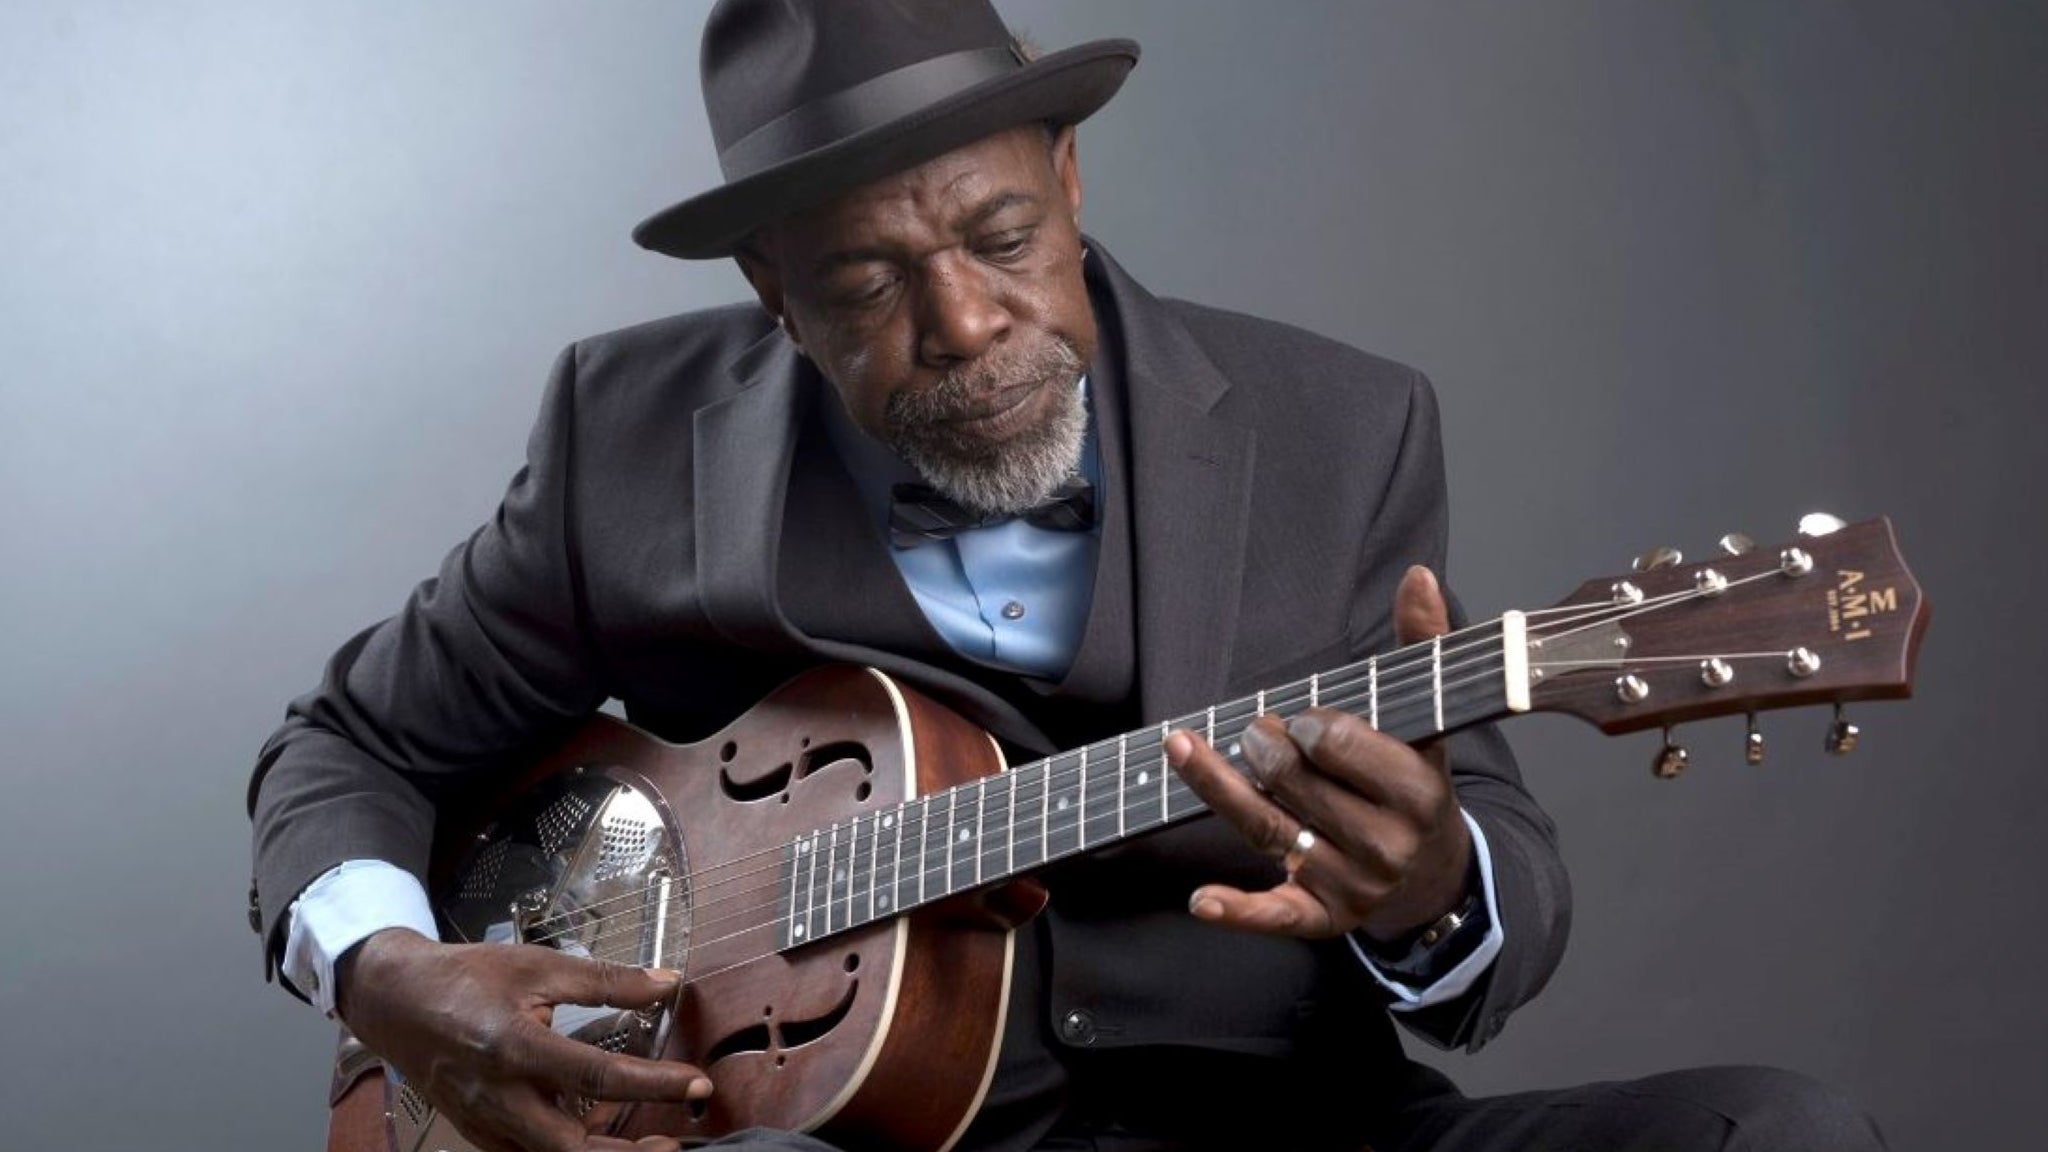 Lurrie Bell (Chicago Blues Legend) in Portsmouth promo photo for Inner Circle presale offer code